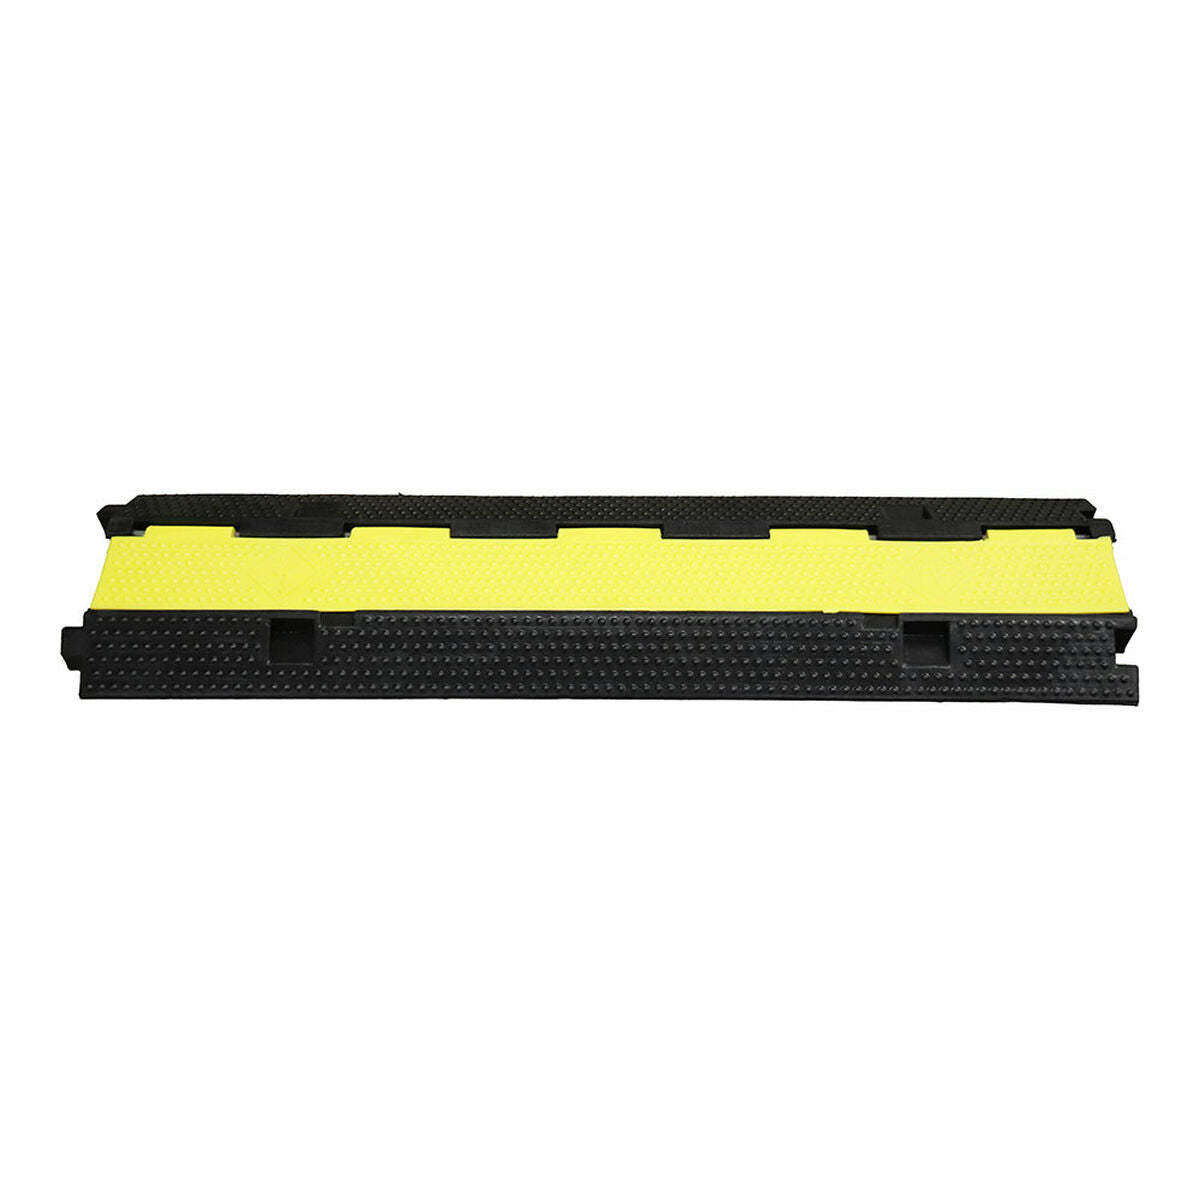 Cable Protector Normaluz 100 x 25 x 5 cm, Normaluz, Electronics, TV, Video and home cinema, cable-protector-normaluz-100-x-25-x-5-cm, Brand_Normaluz, category-reference-2609, category-reference-2803, category-reference-2821, category-reference-t-18805, category-reference-t-19653, category-reference-t-19921, category-reference-t-21400, category-reference-t-25735, cinema and television, Condition_NEW, entertainment, networks/wiring, Price_50 - 100, RiotNook